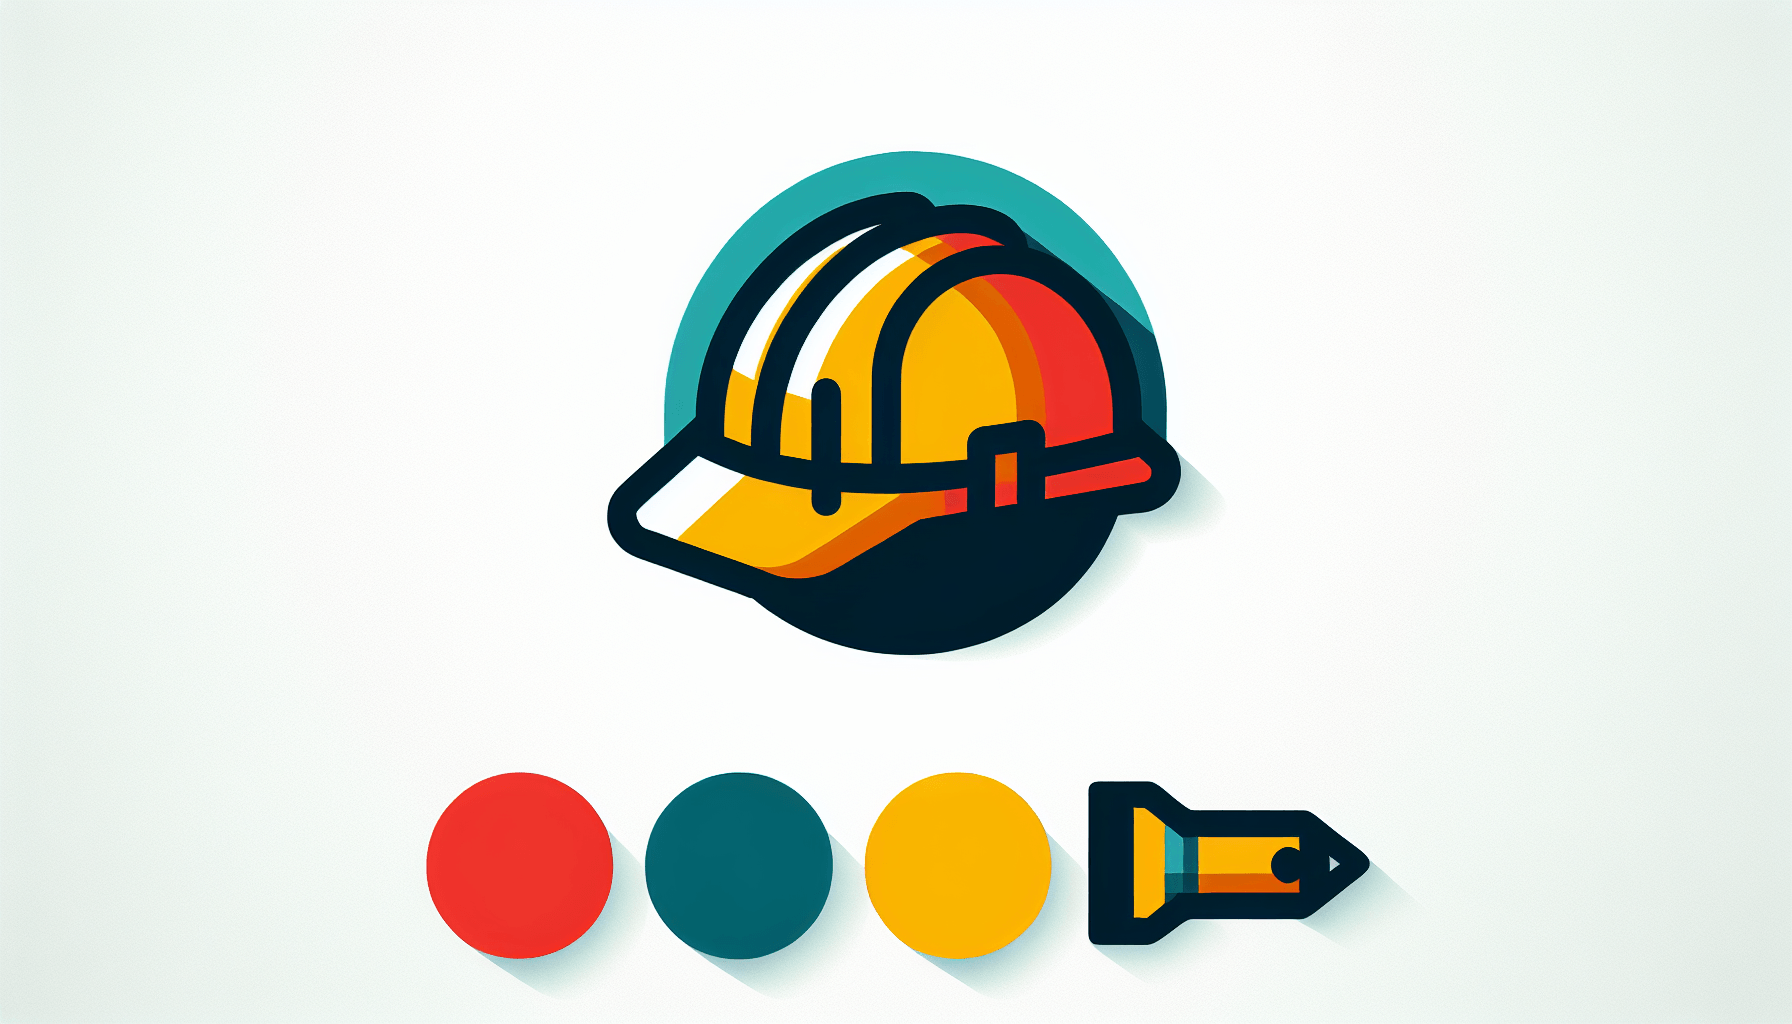 Hardhat in flat illustration style and white background, red #f47574, green #88c7a8, yellow #fcc44b, and blue #645bc8 colors.